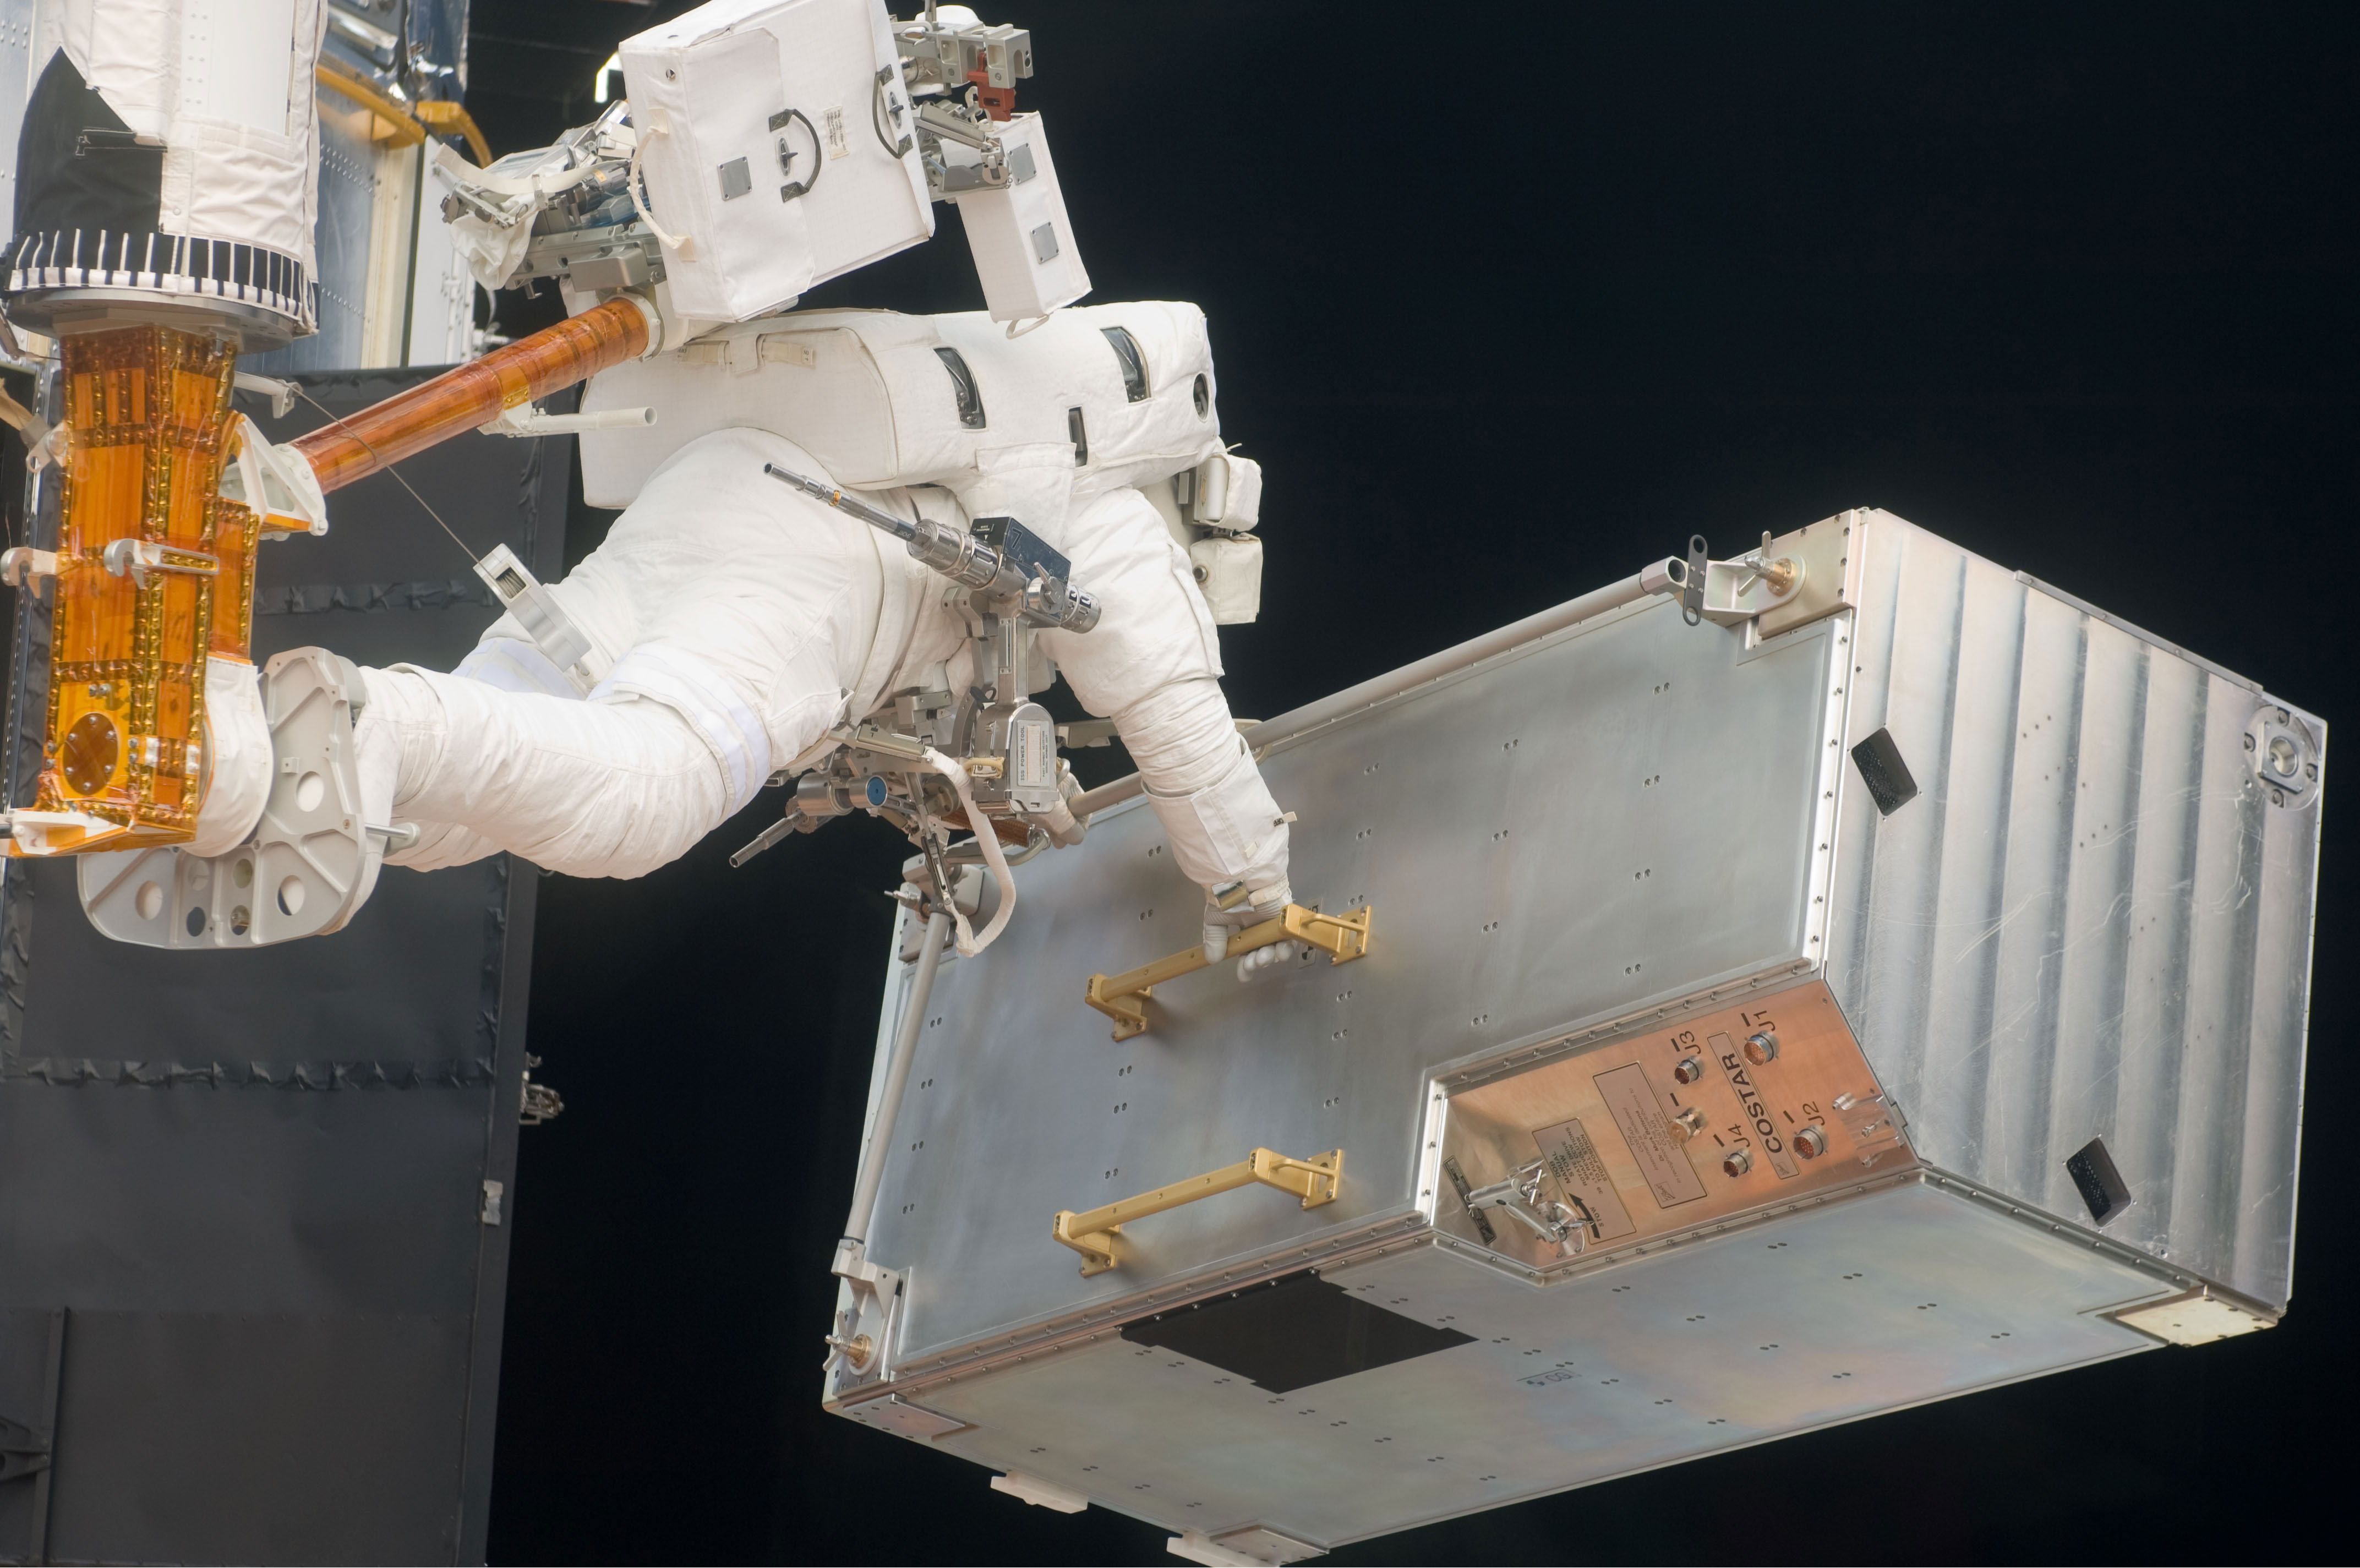 Andrew Feustel, positioned on a foot restraint on the end of Atlantis’ remote manipulator system (RMS), moves the Corrective Optics Space Telescope Axial Replacement (COSTAR) during the mission’s third EVA session to refurbish and upgrade the Hubble Space Telescope. Credit: NASA